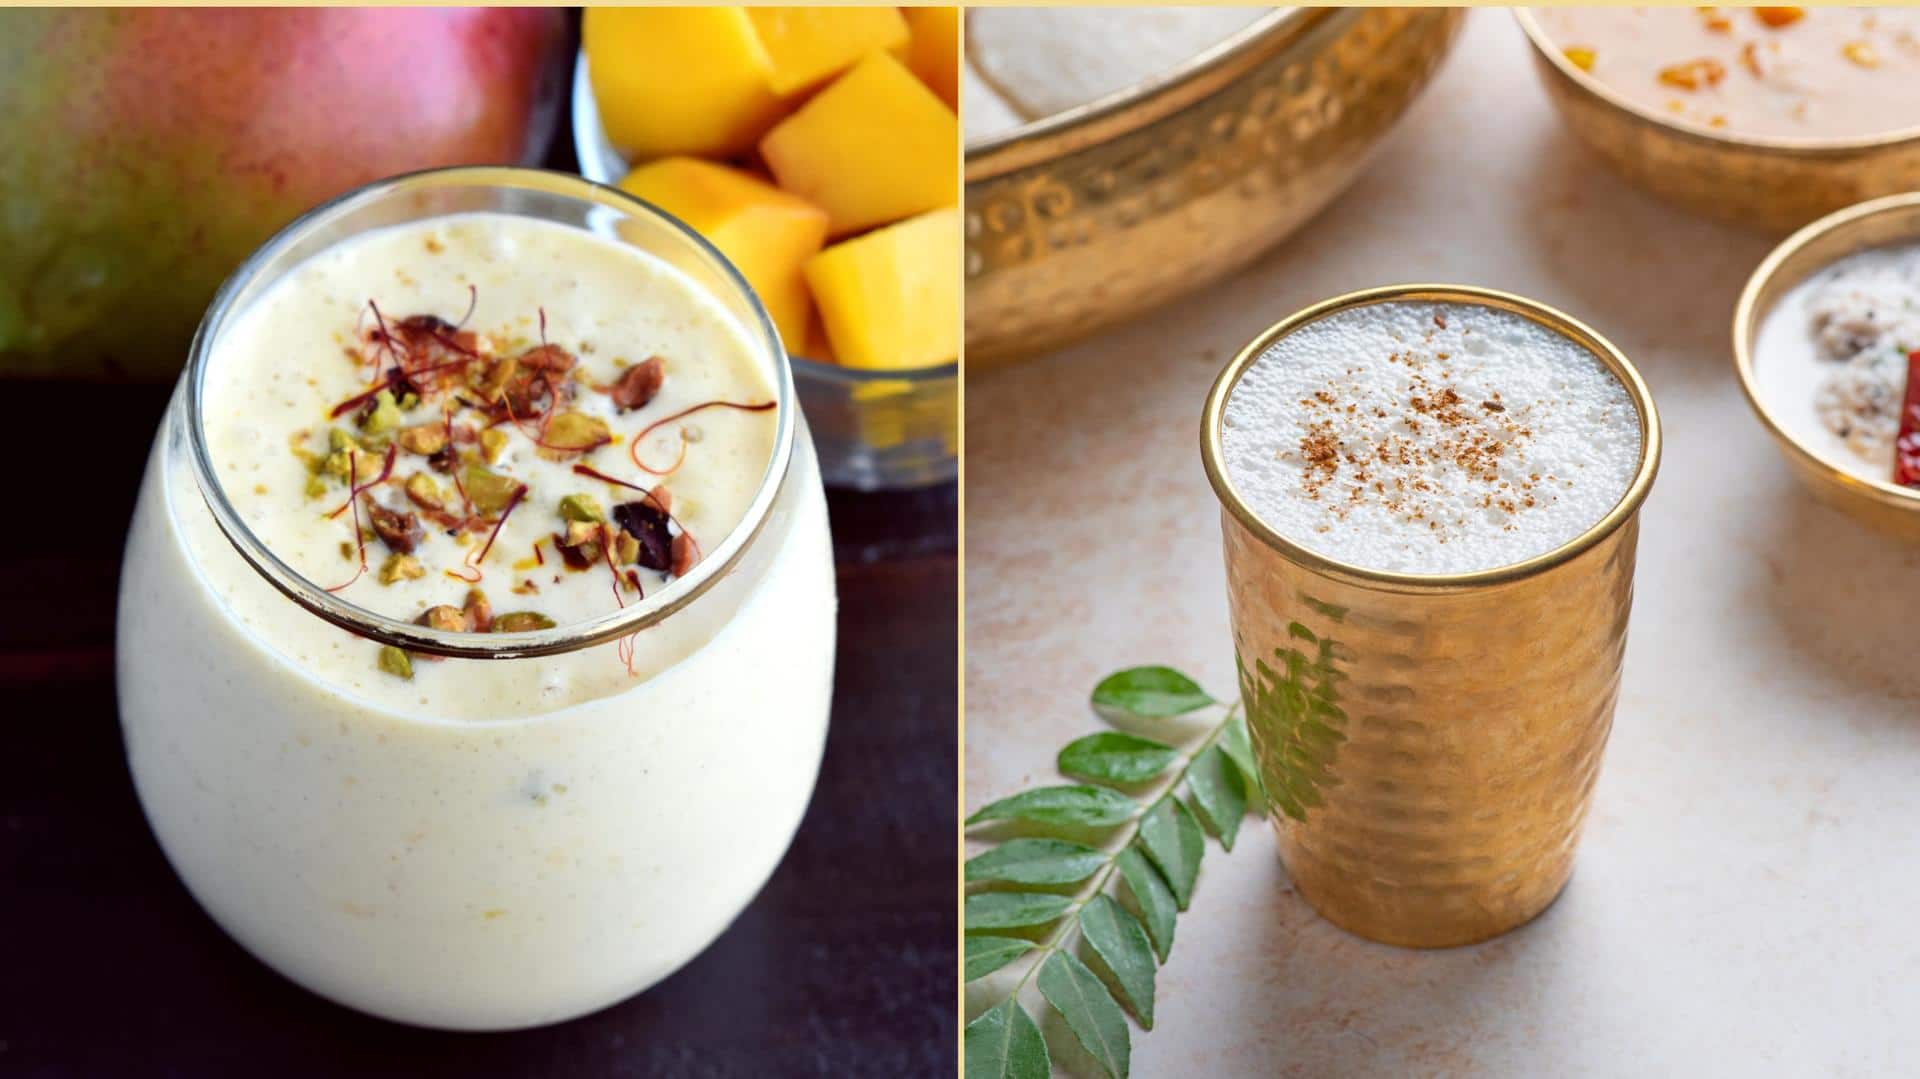 Lassi v/s Chaas: What is the difference